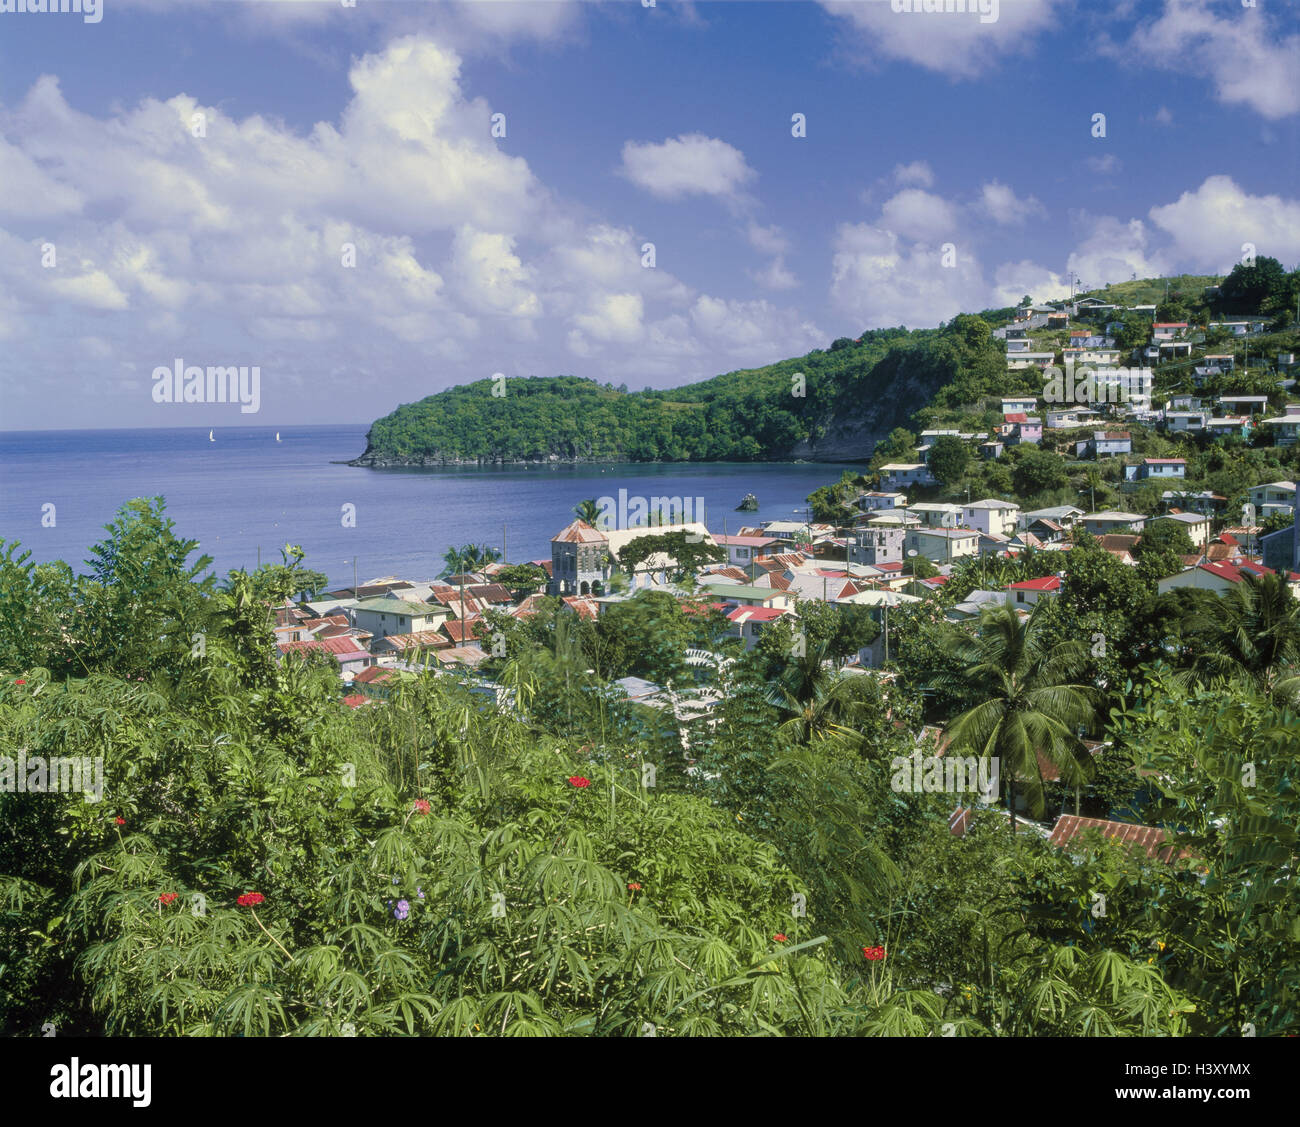 The Caribbean, the small Antilles, Saint Lucia, Anse la Raye, local view, Central America, island state, British Winward islands, West-Indian islands, islands about the wind, island, Saint Lucia, coast, sea, bay, fishing village, place, village, local vie Stock Photo